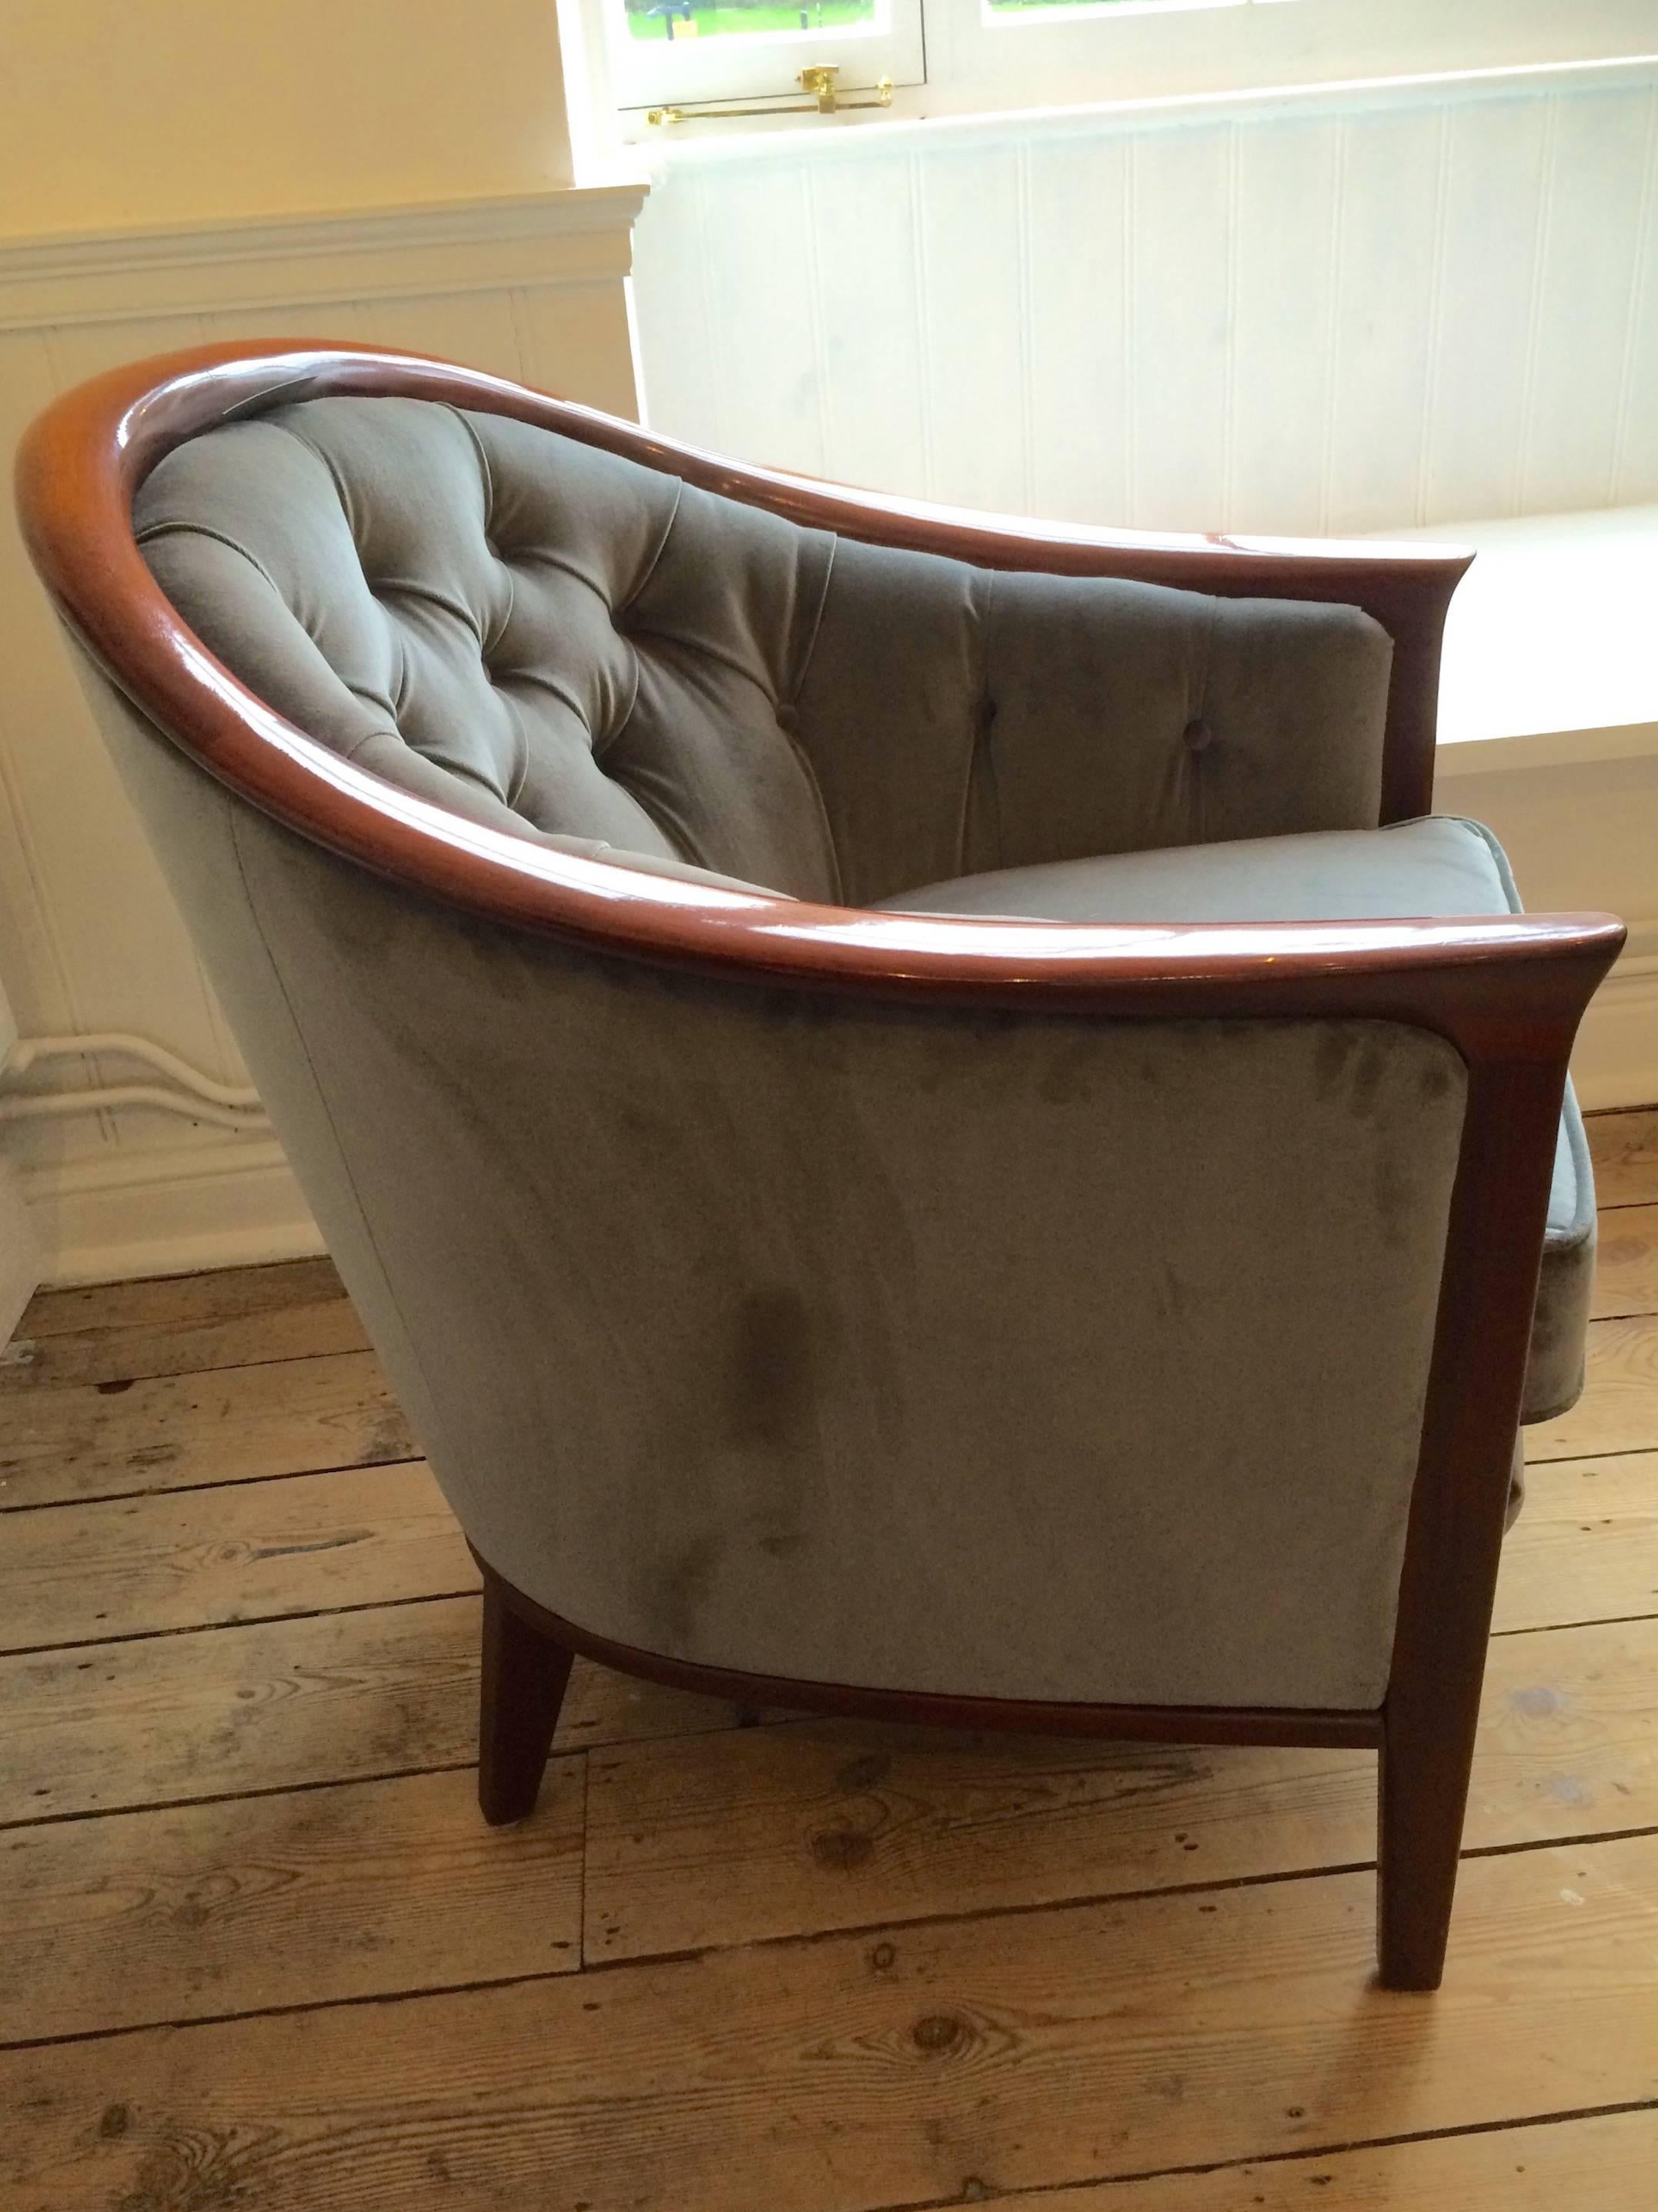 Rounded form with sweeping arms, upholstered in Pierre Frey Opera grey velvet with button detail.